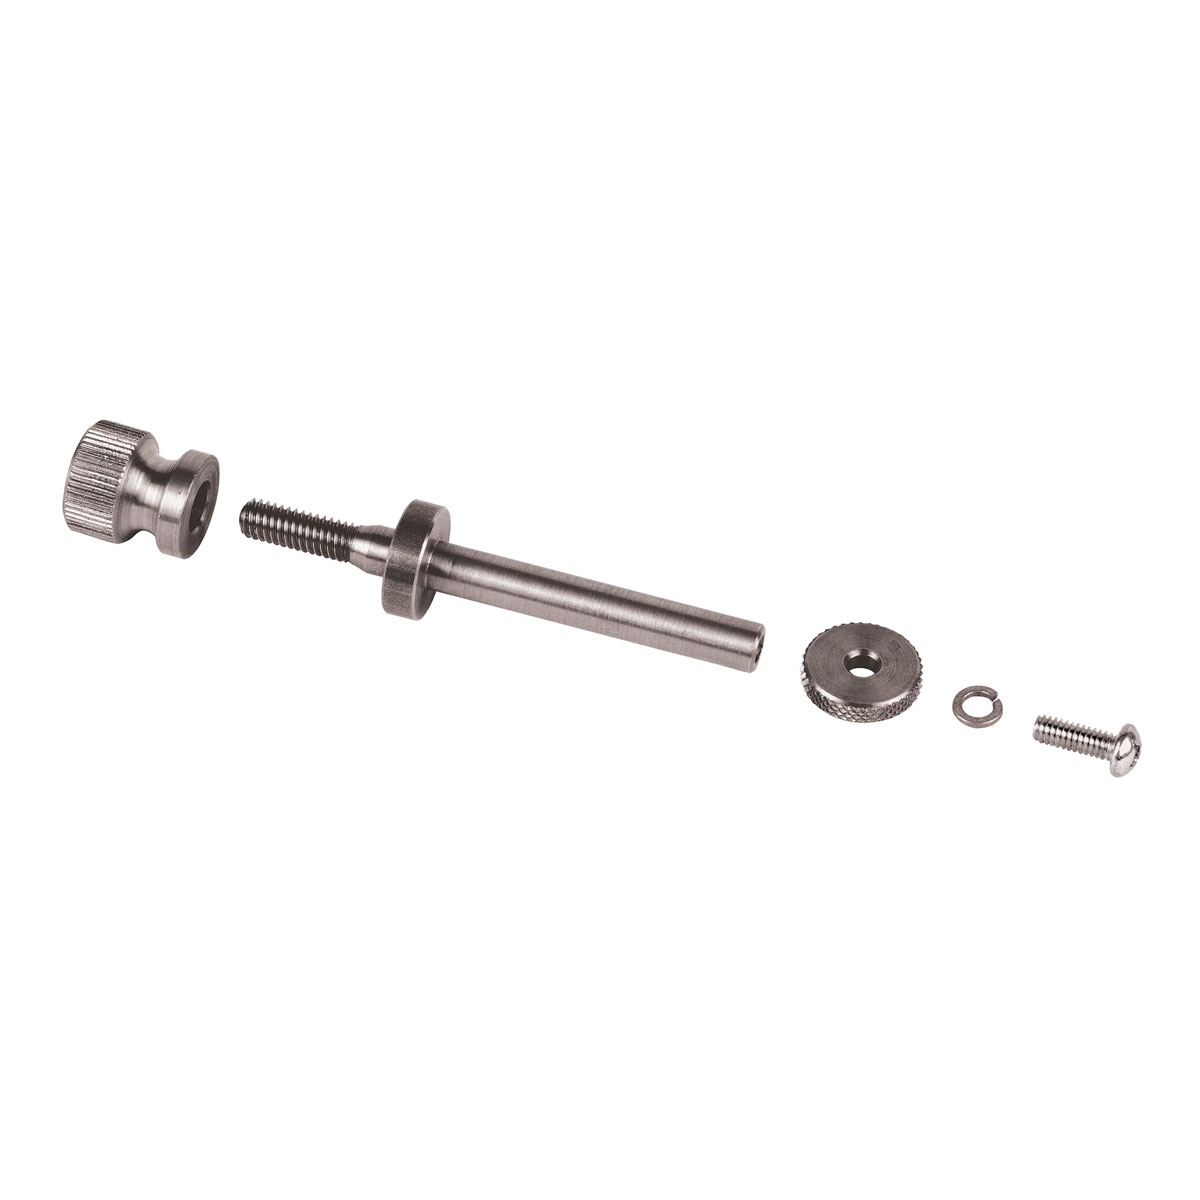 Scale Bar Spindle Kit (M3)